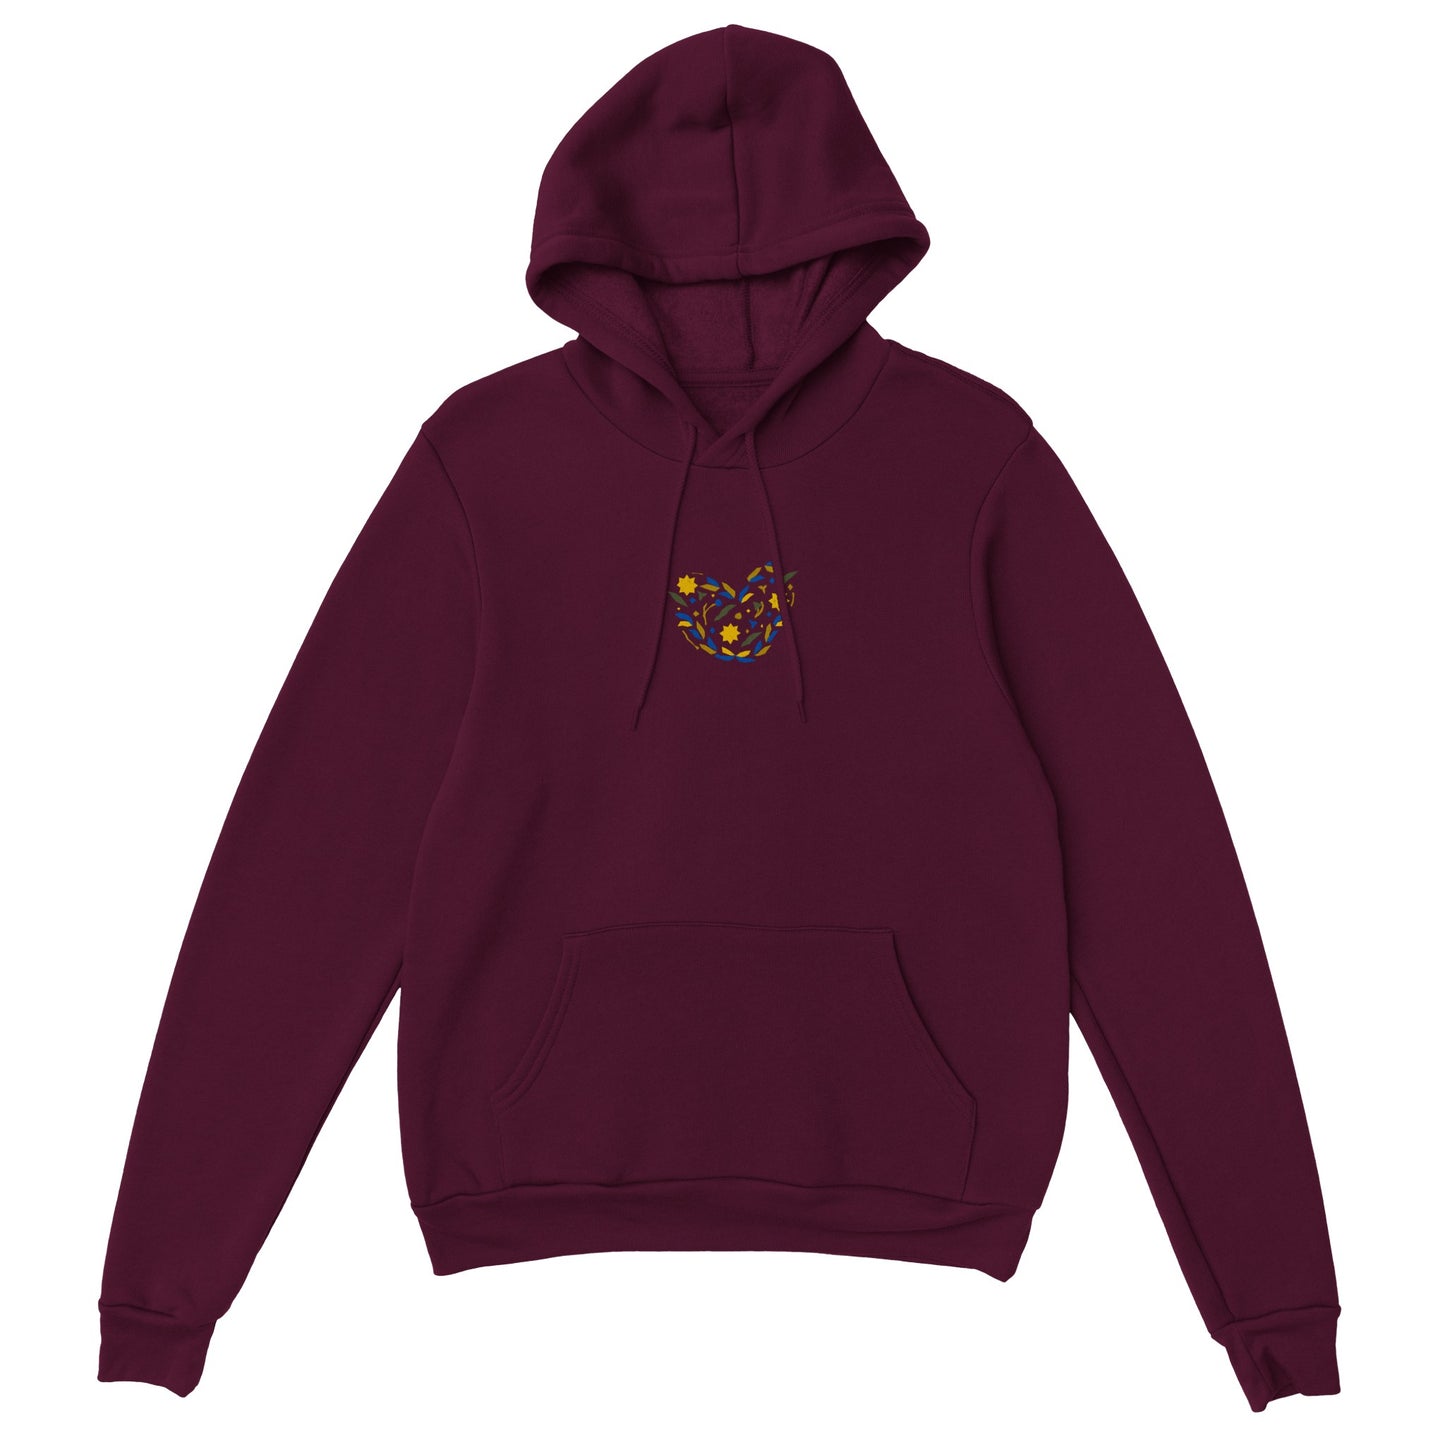 Classic Unisex Pullover Hoodie "flower heart"